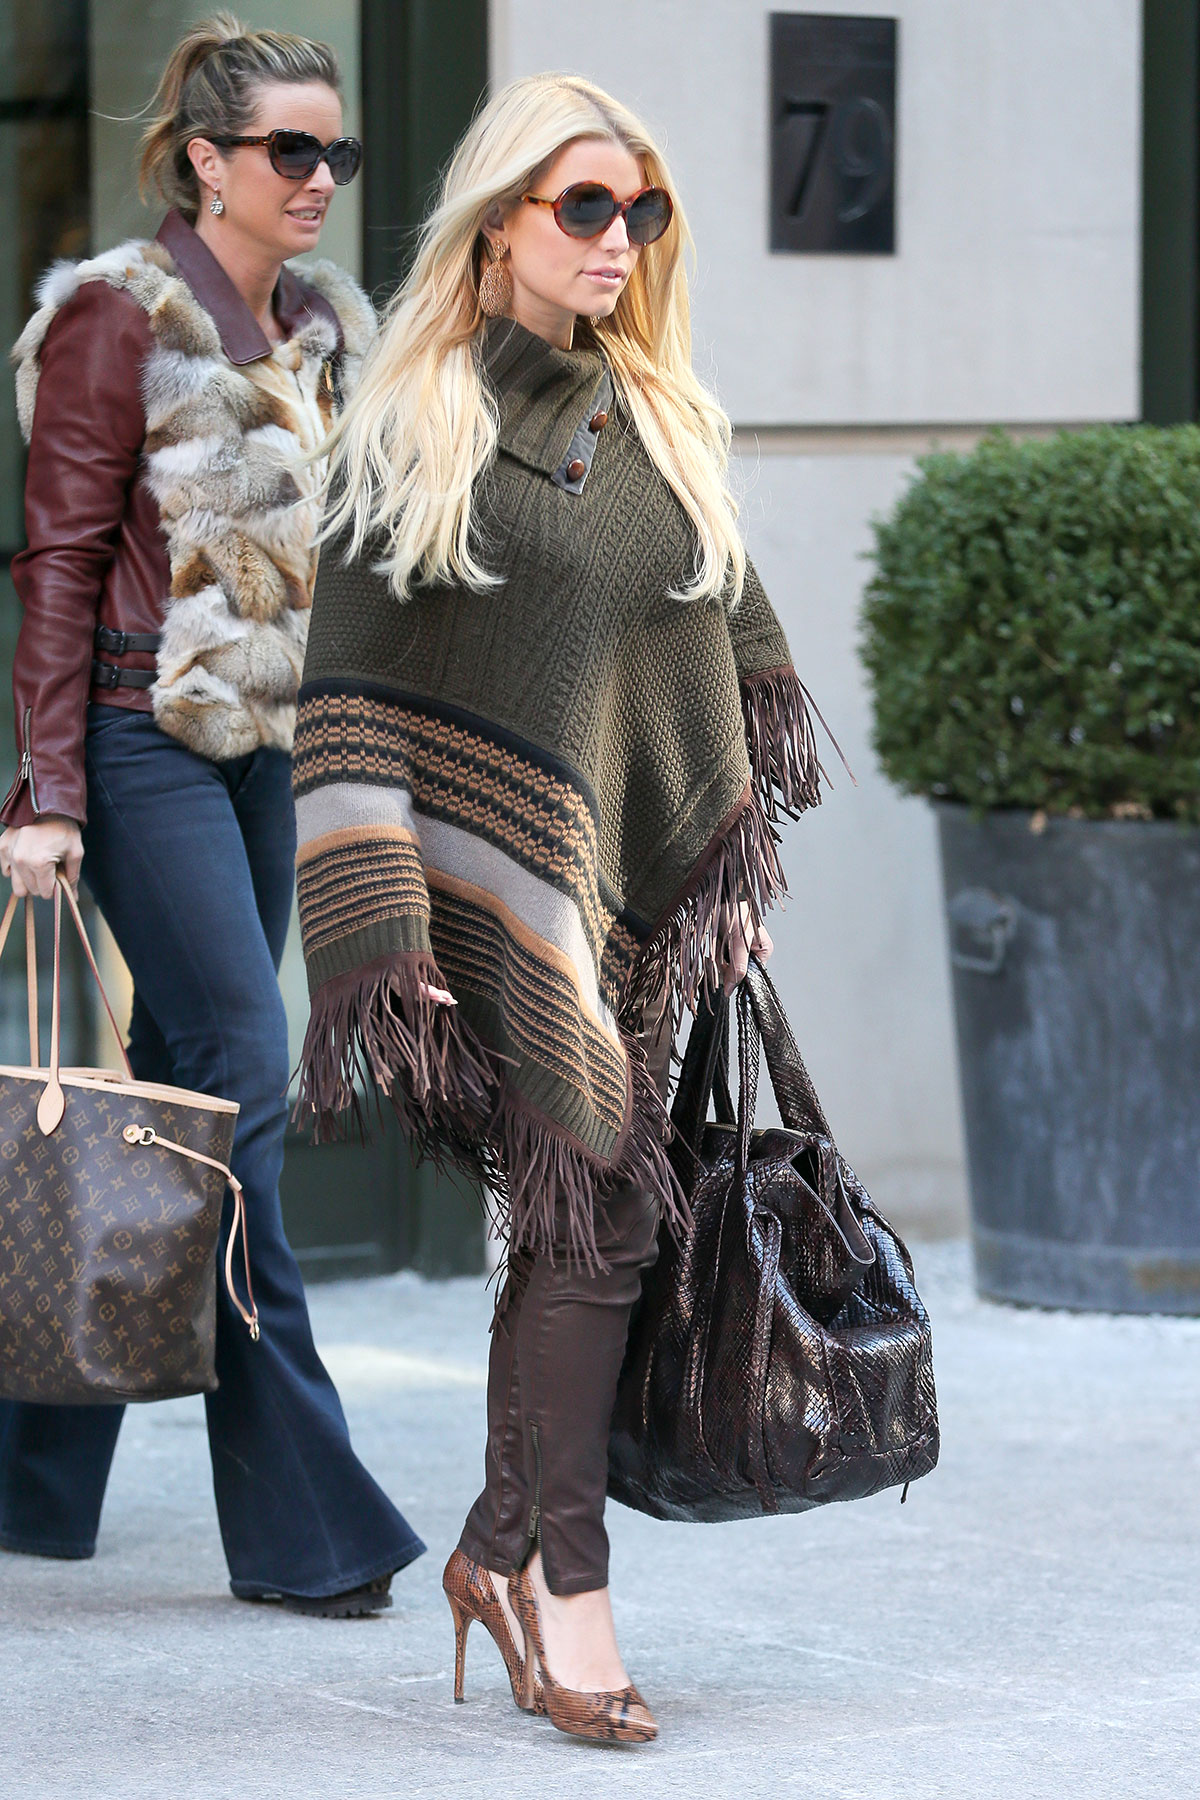 Jessica Simpson leaves JFK airport and arrives at LAX